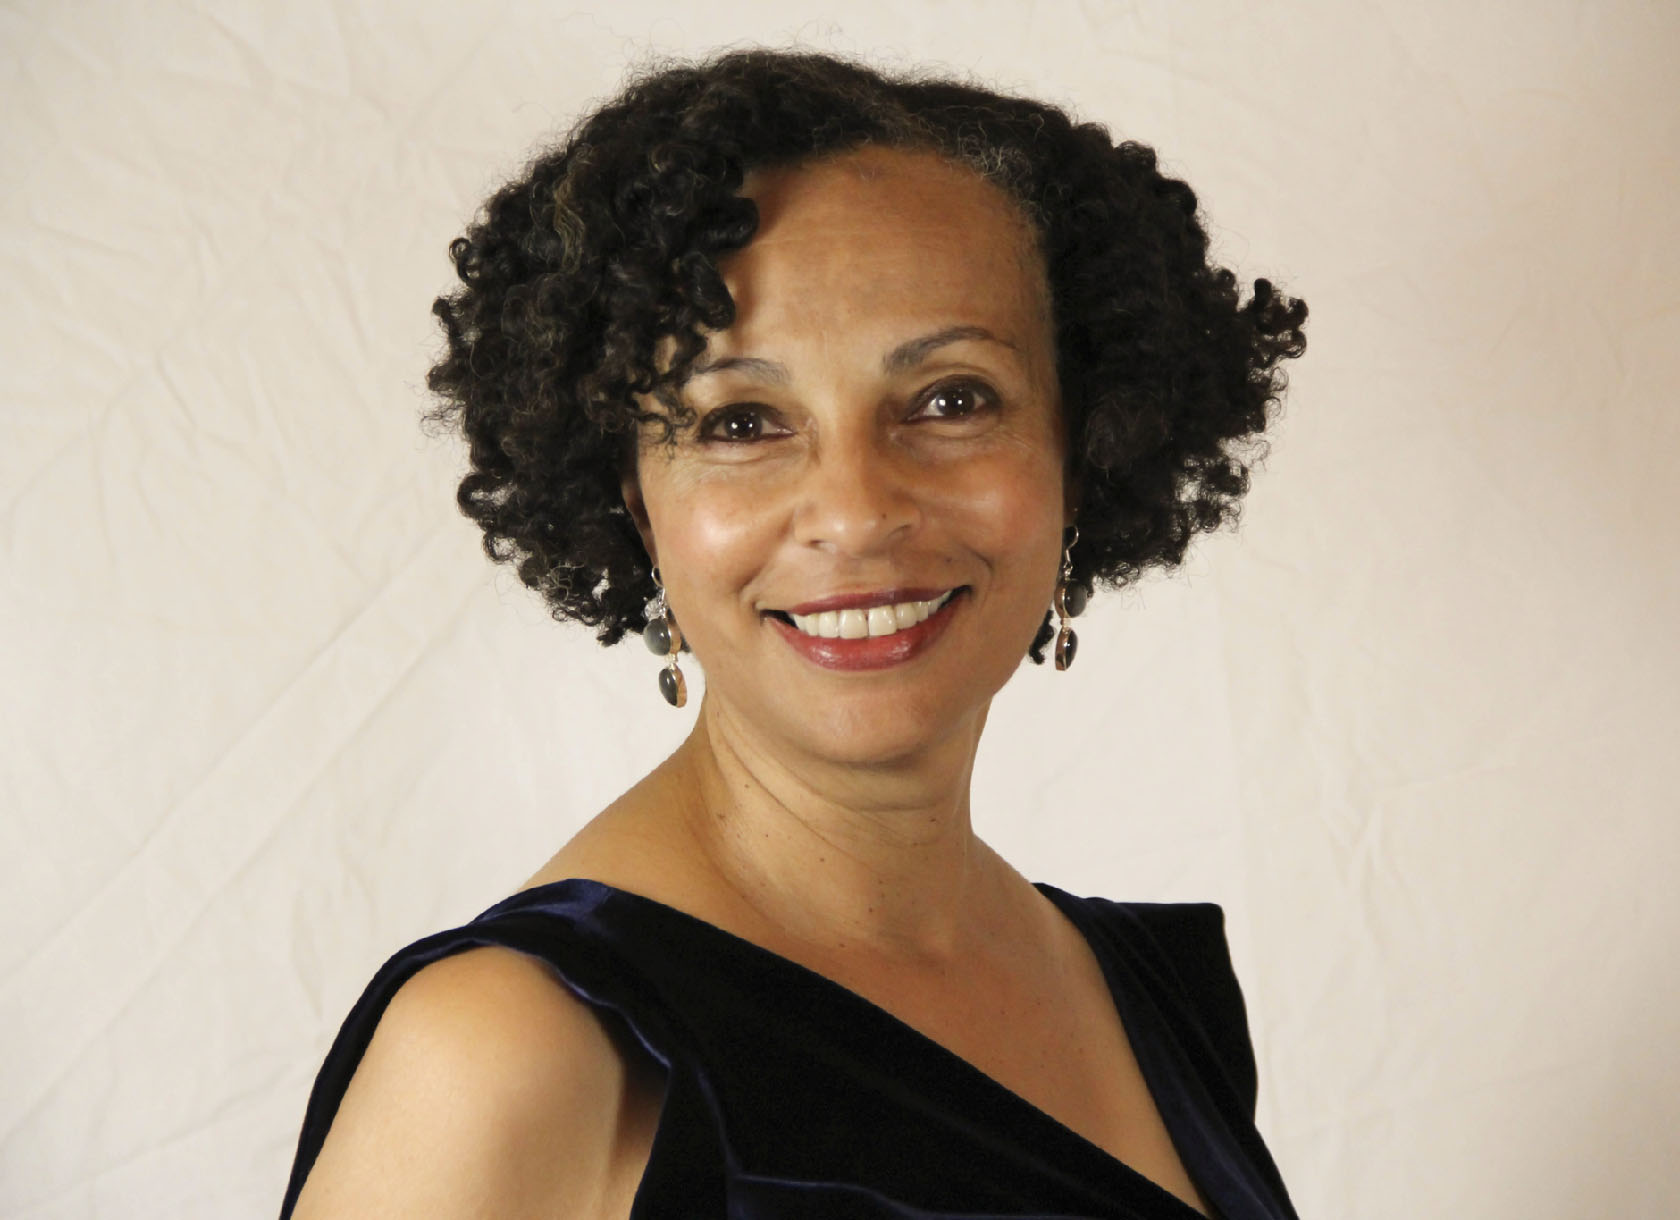 Vice President and Secretary of the Board Denise Nelson Nash